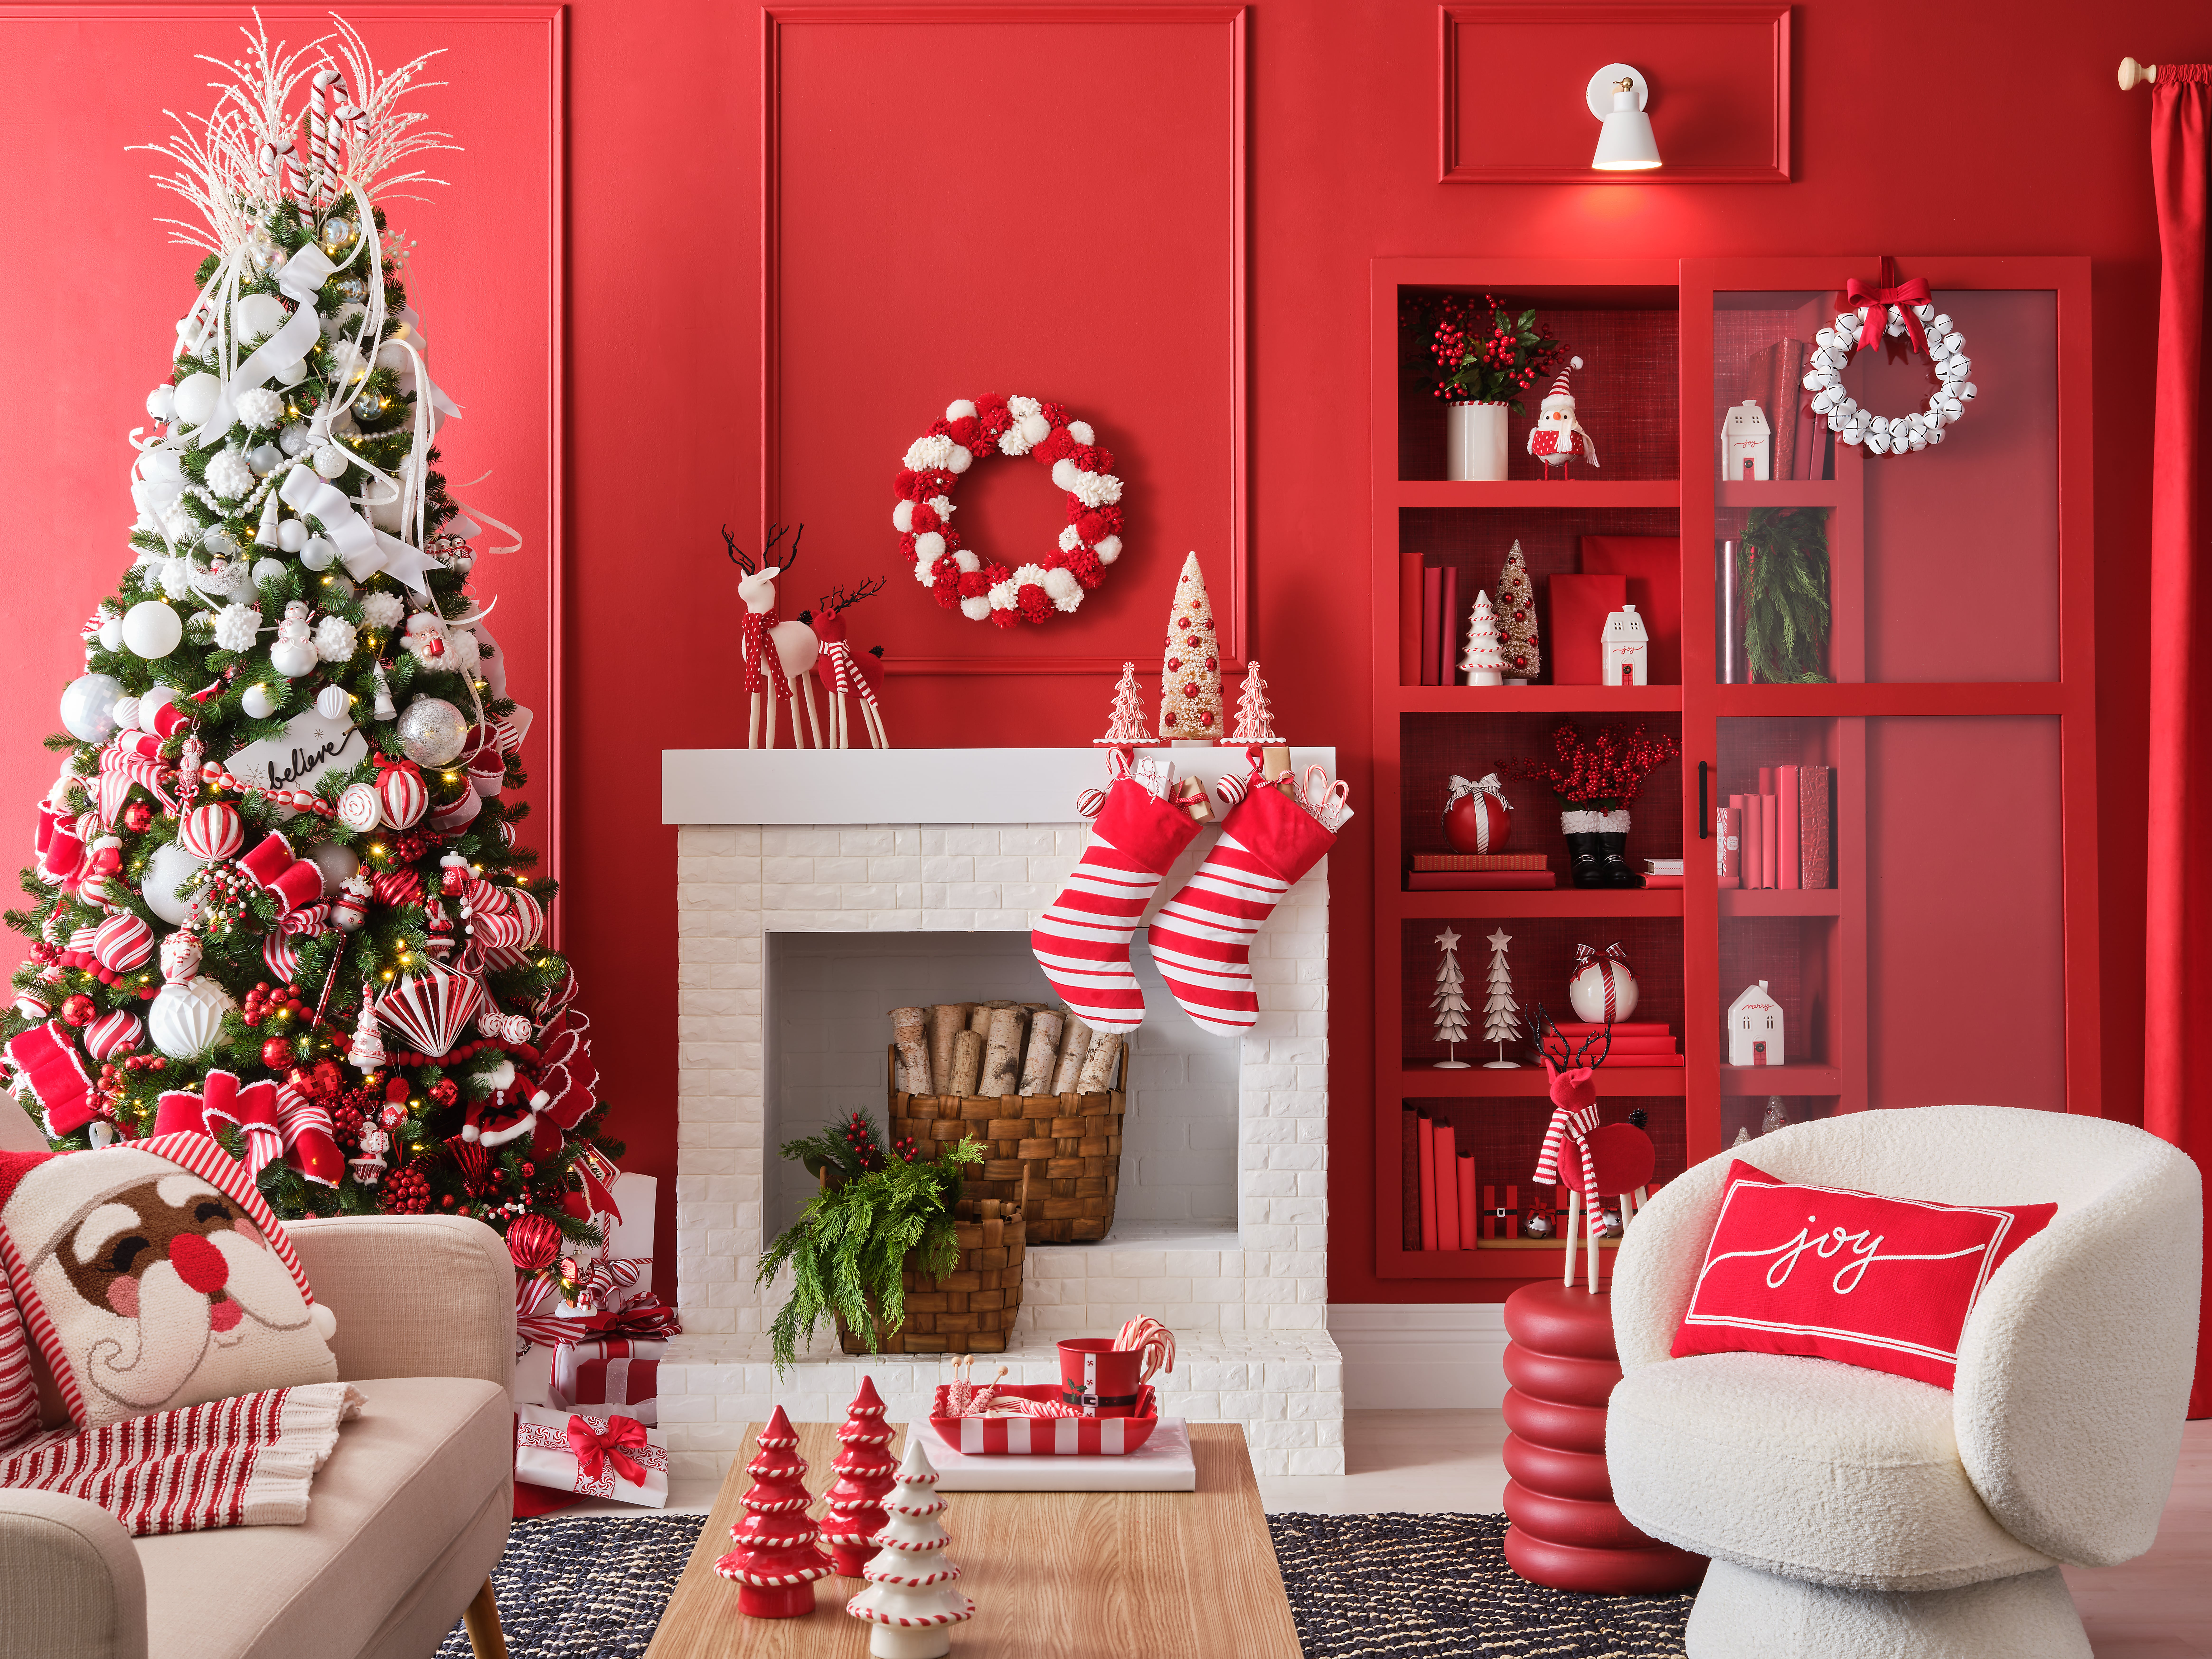 This is the Pottery Barn Christmas decor that sells out every single year